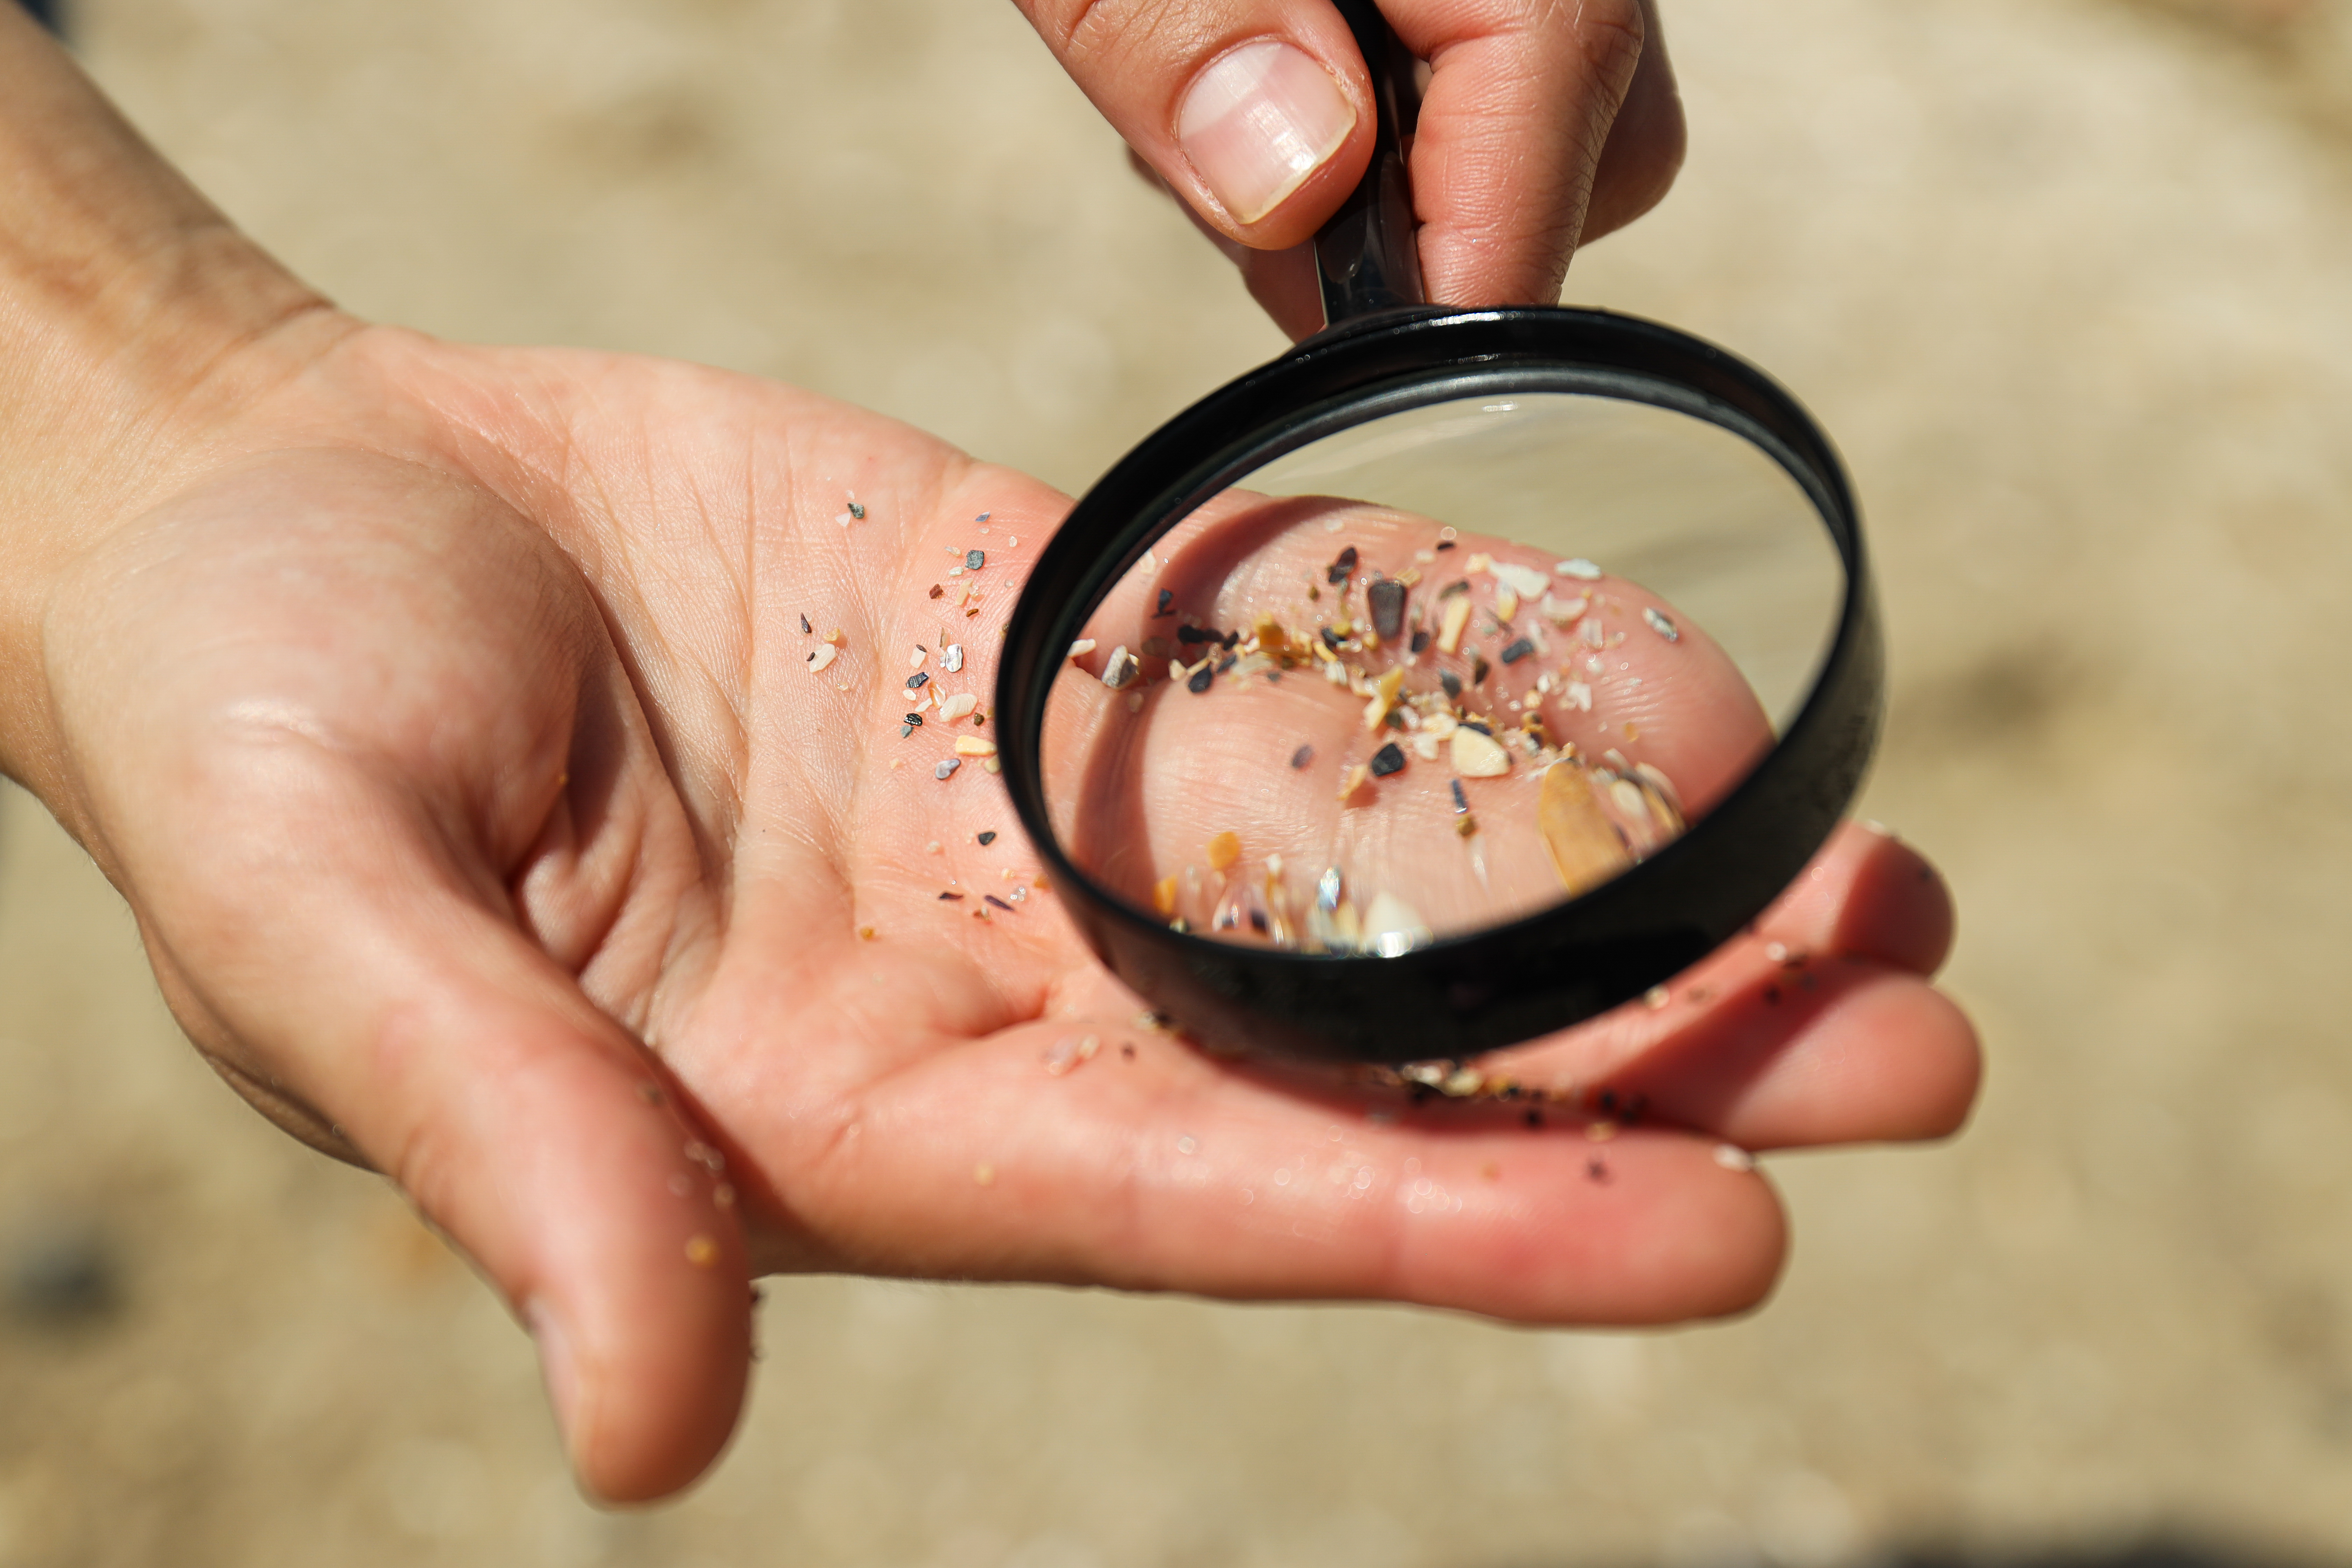 Sand on the hands under a magnifying glass